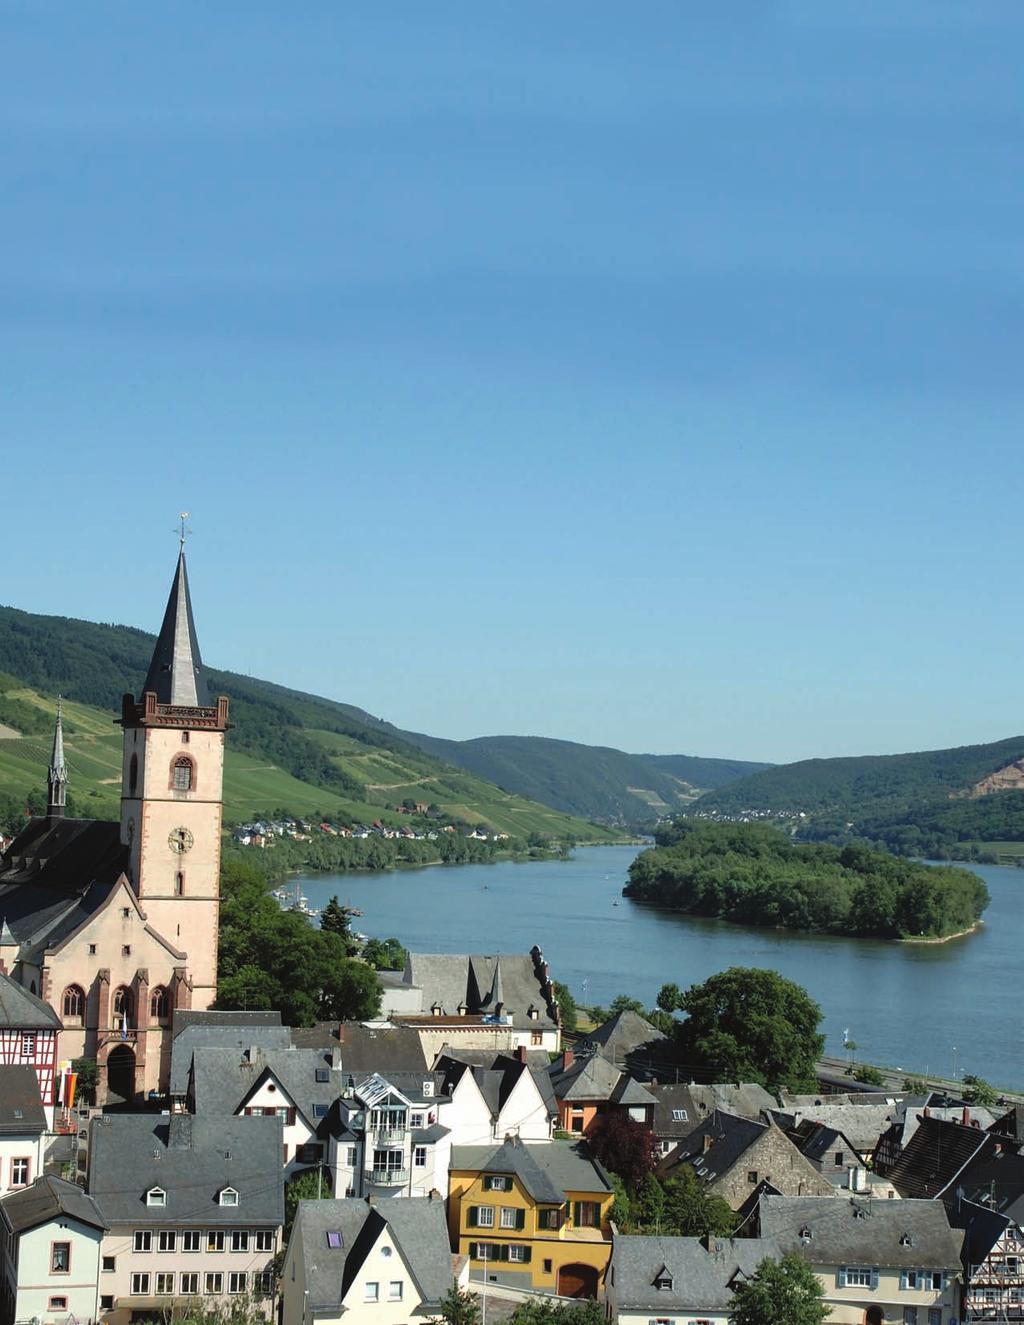 CHAPTER 1 The Magnificent Rhine From a distance, the Rhine River and its surroundings look like something from a fairy tale. Thickly forested hills rise from the banks of the river.